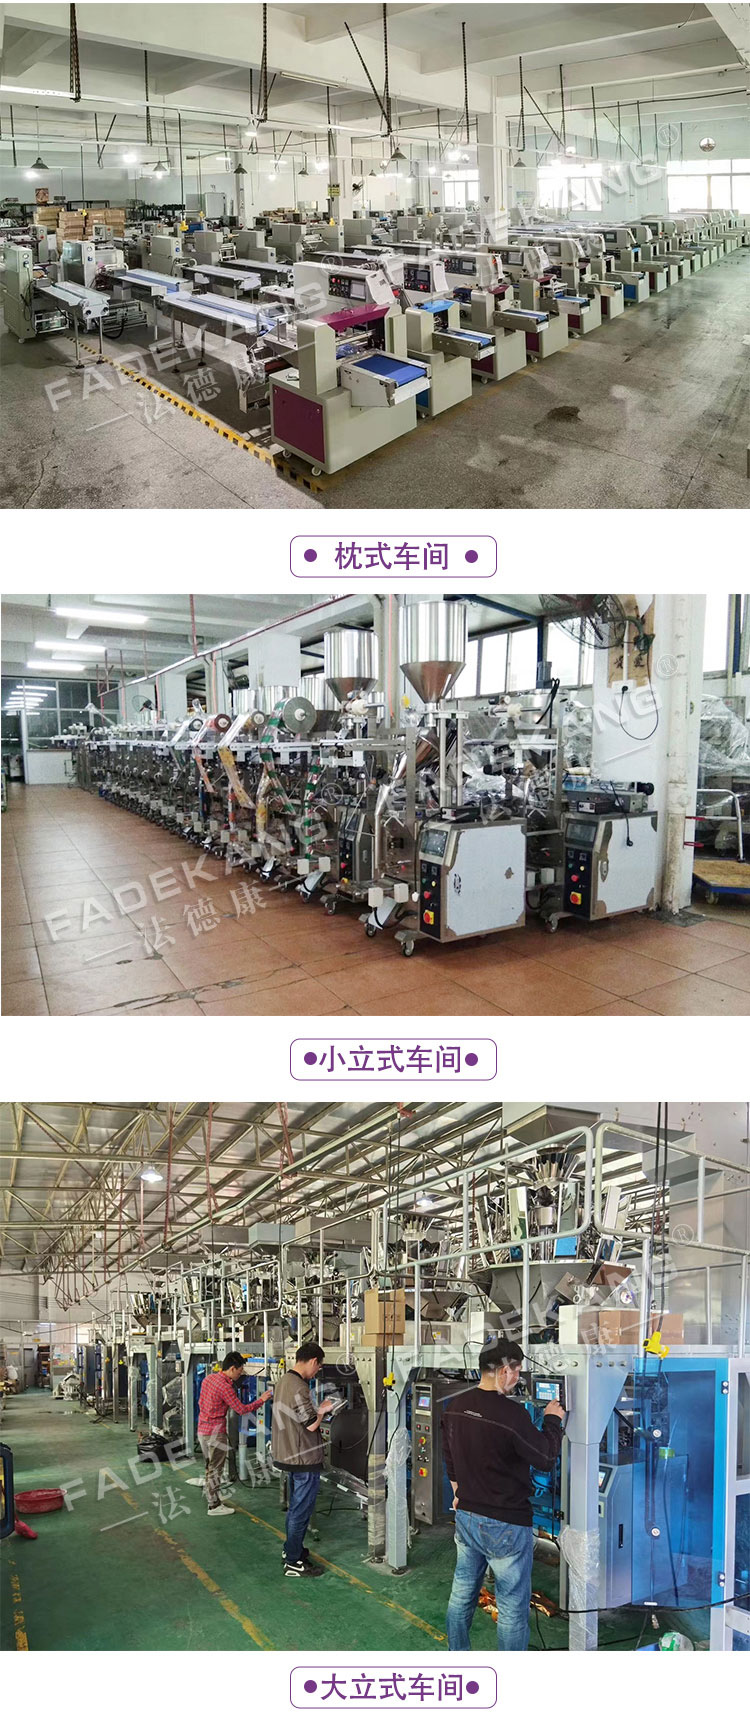 Automatic cutting ice cream stick packaging machine, fully automatic ice cream and ice cream packaging equipment